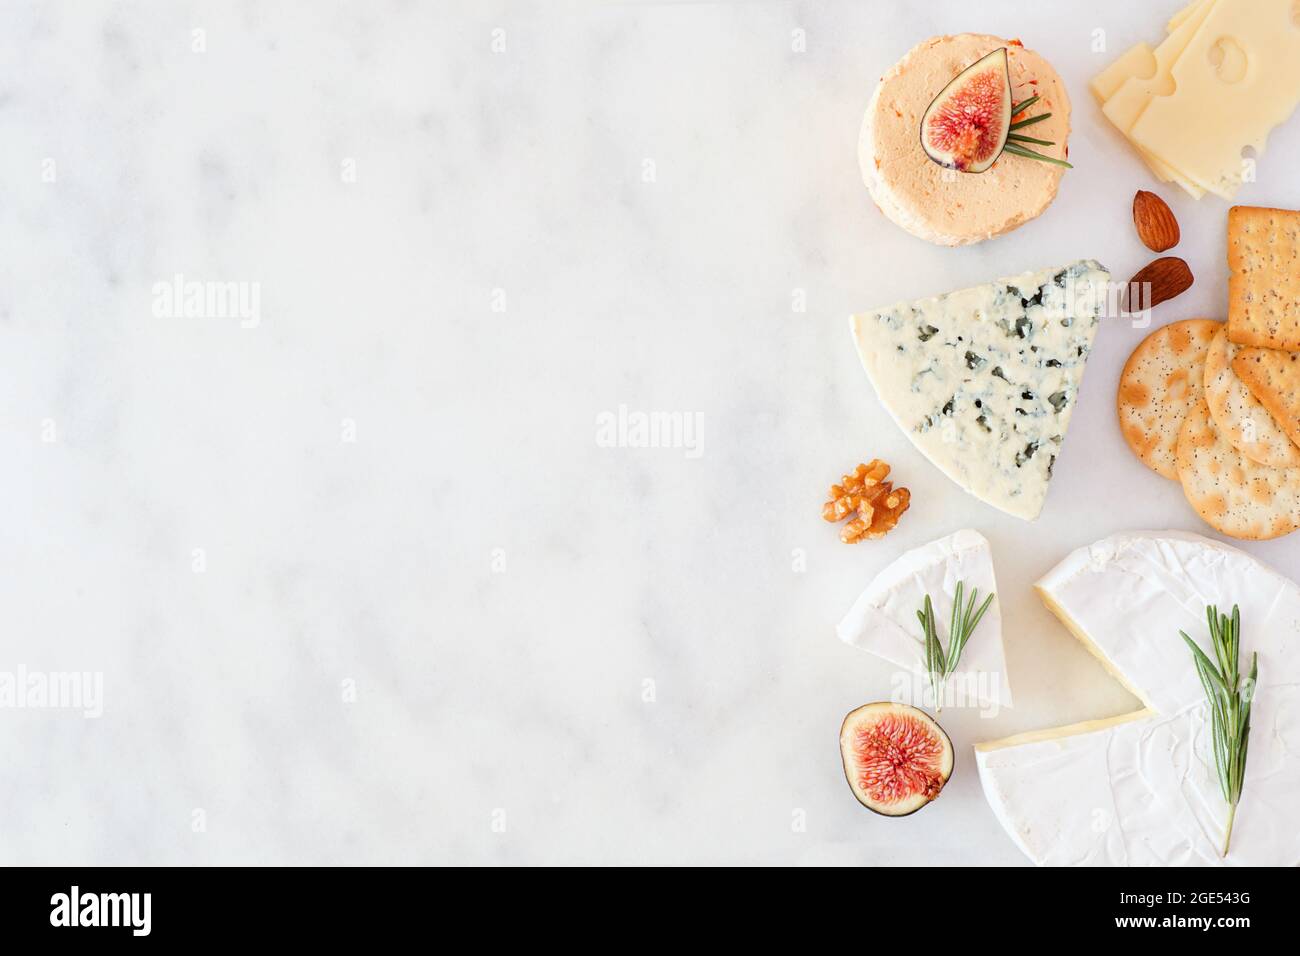 Border of a selection of cheeses, figs, nuts and crackers. Top view on a white marble background with copy space. Stock Photo